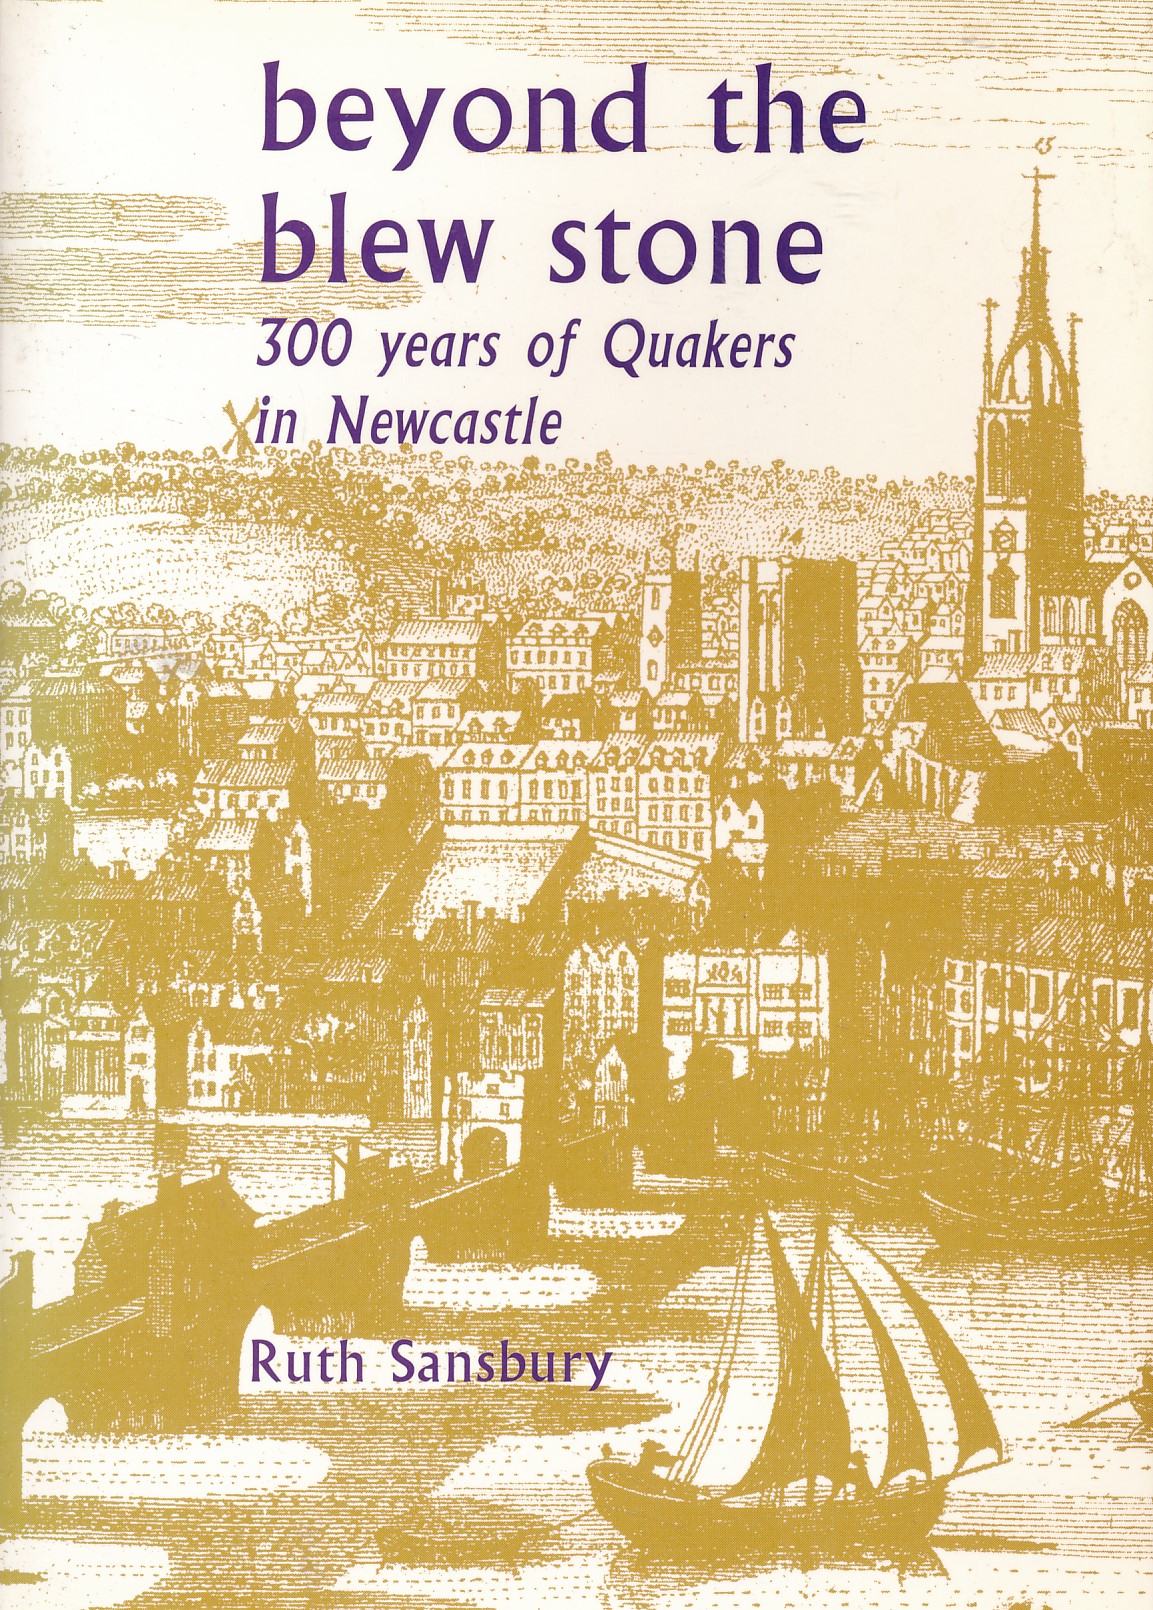 Beyond the Blew Stone. 300 Years of Quakers in Newcastle